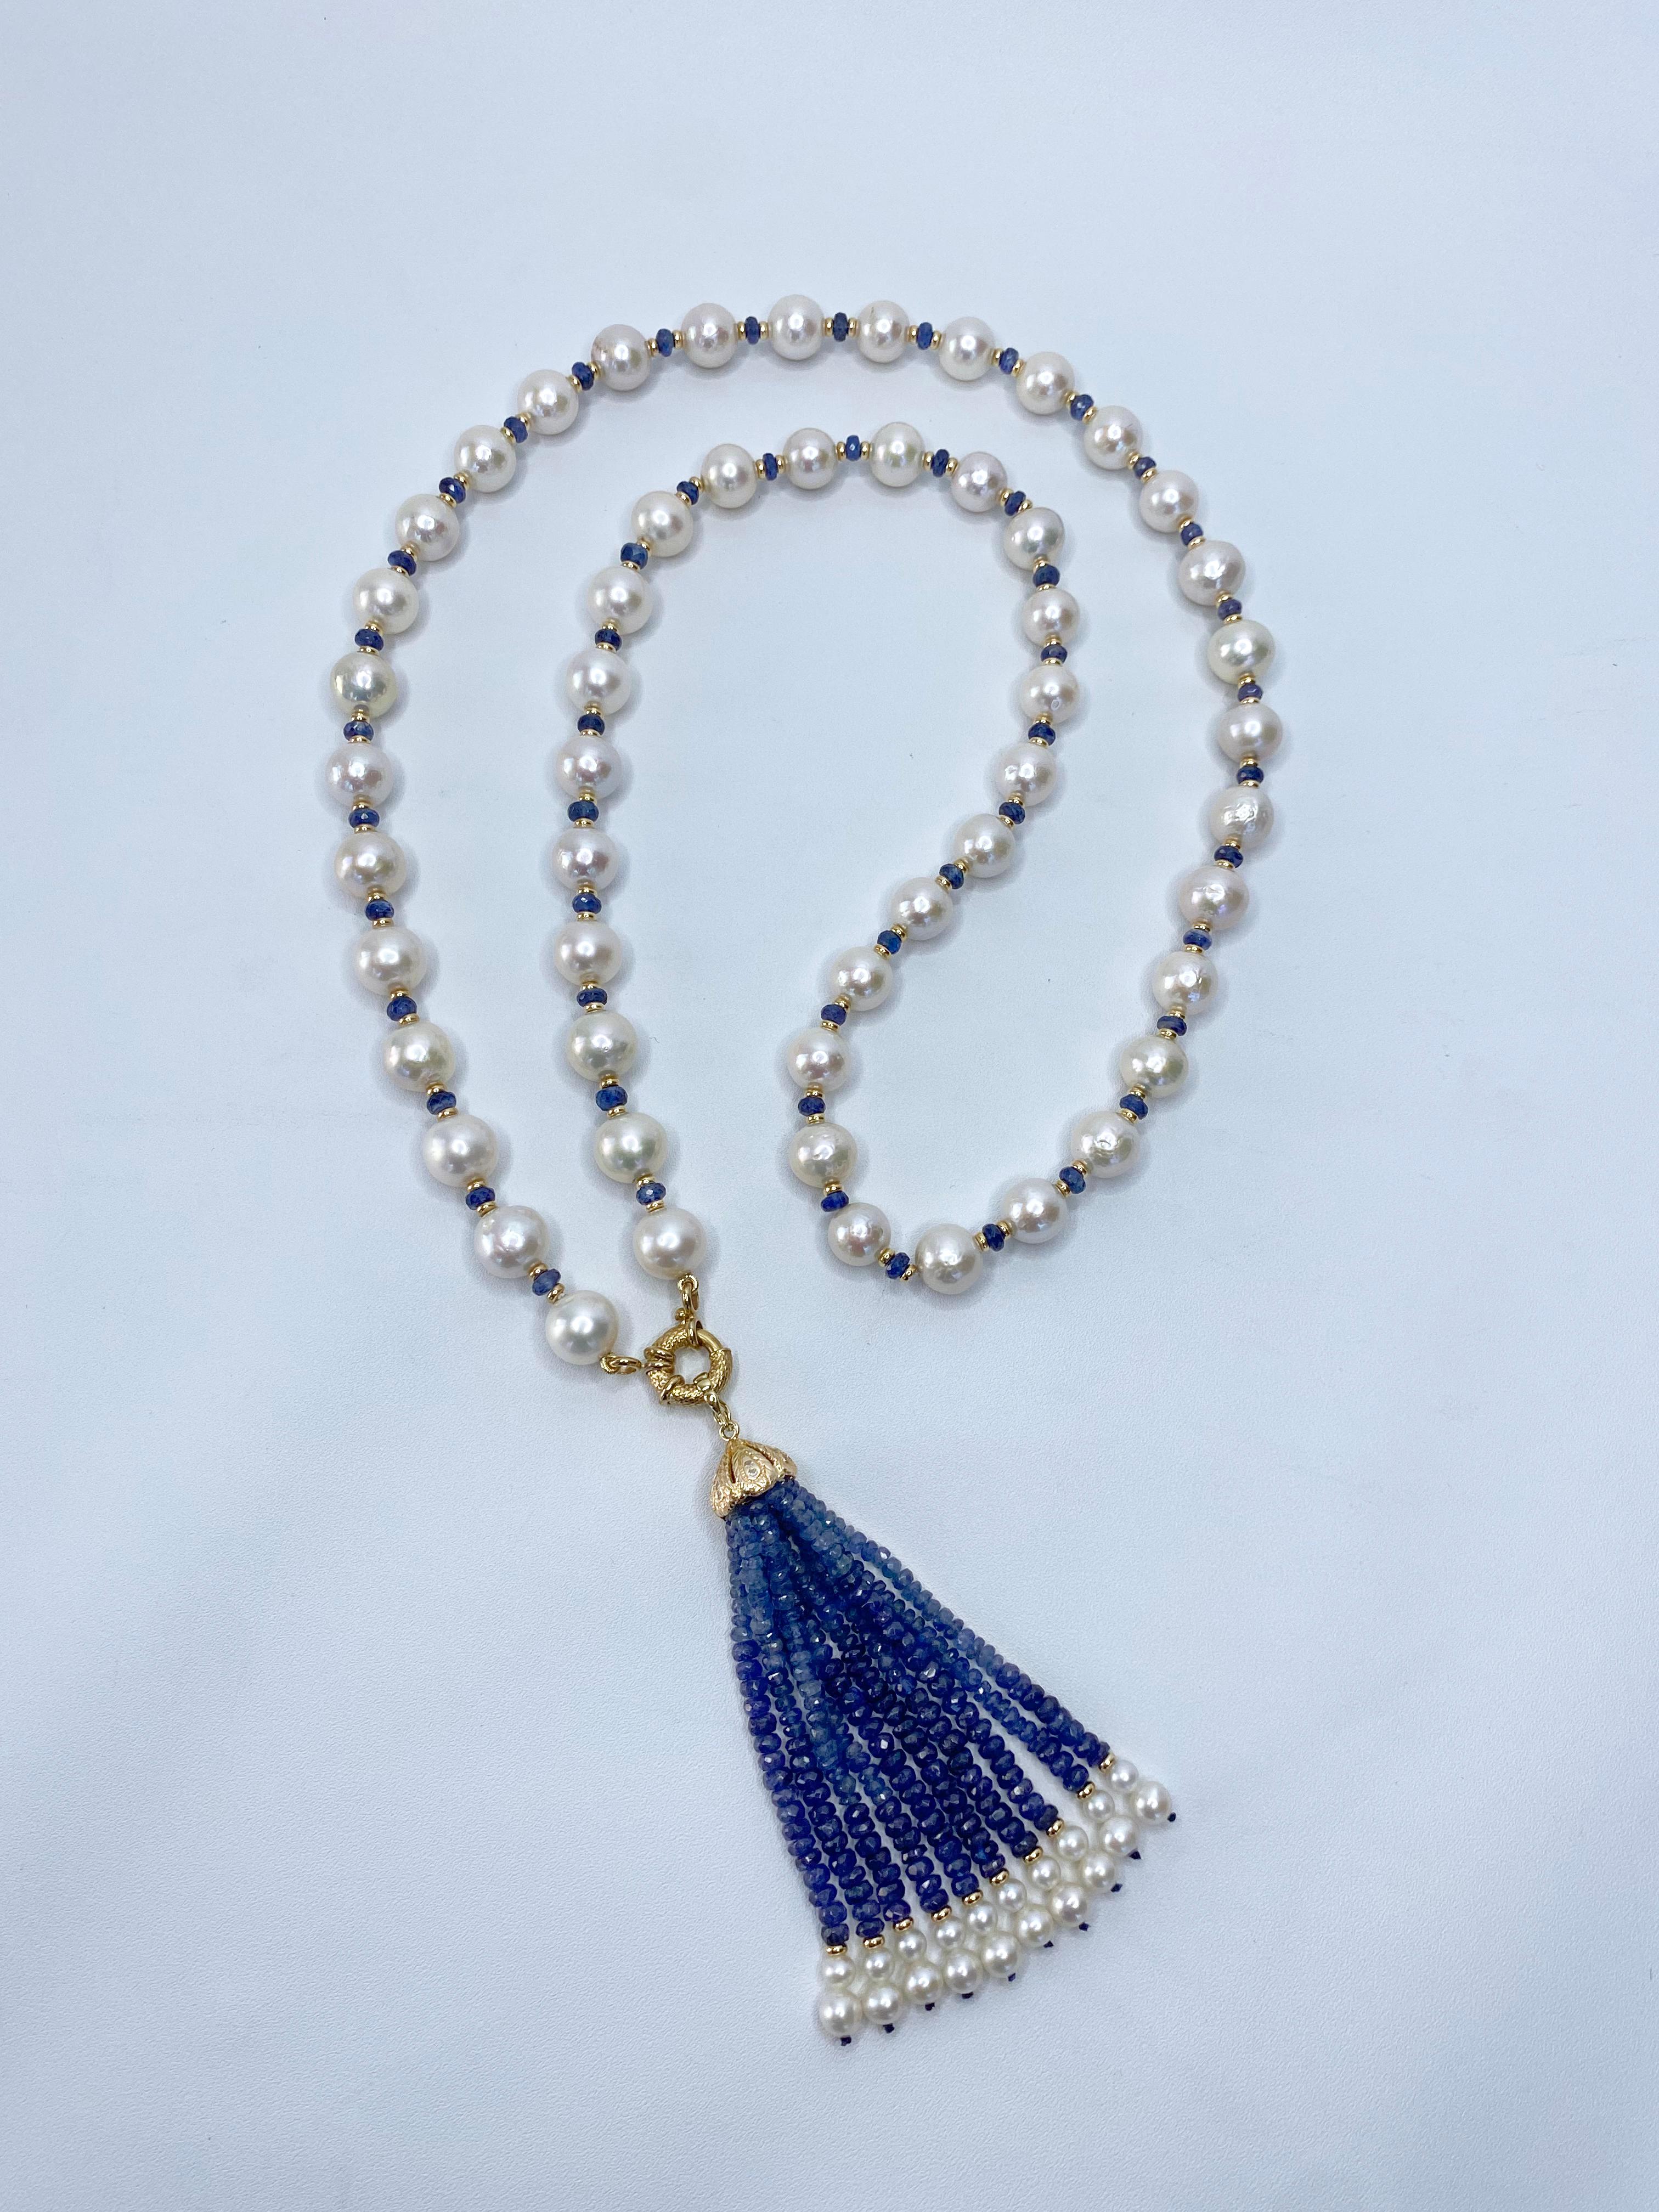 Marina J Faceted Blue Sapphire Beads, Pearls & 14k Yellow Gold Sautoir / Lariat For Sale 4